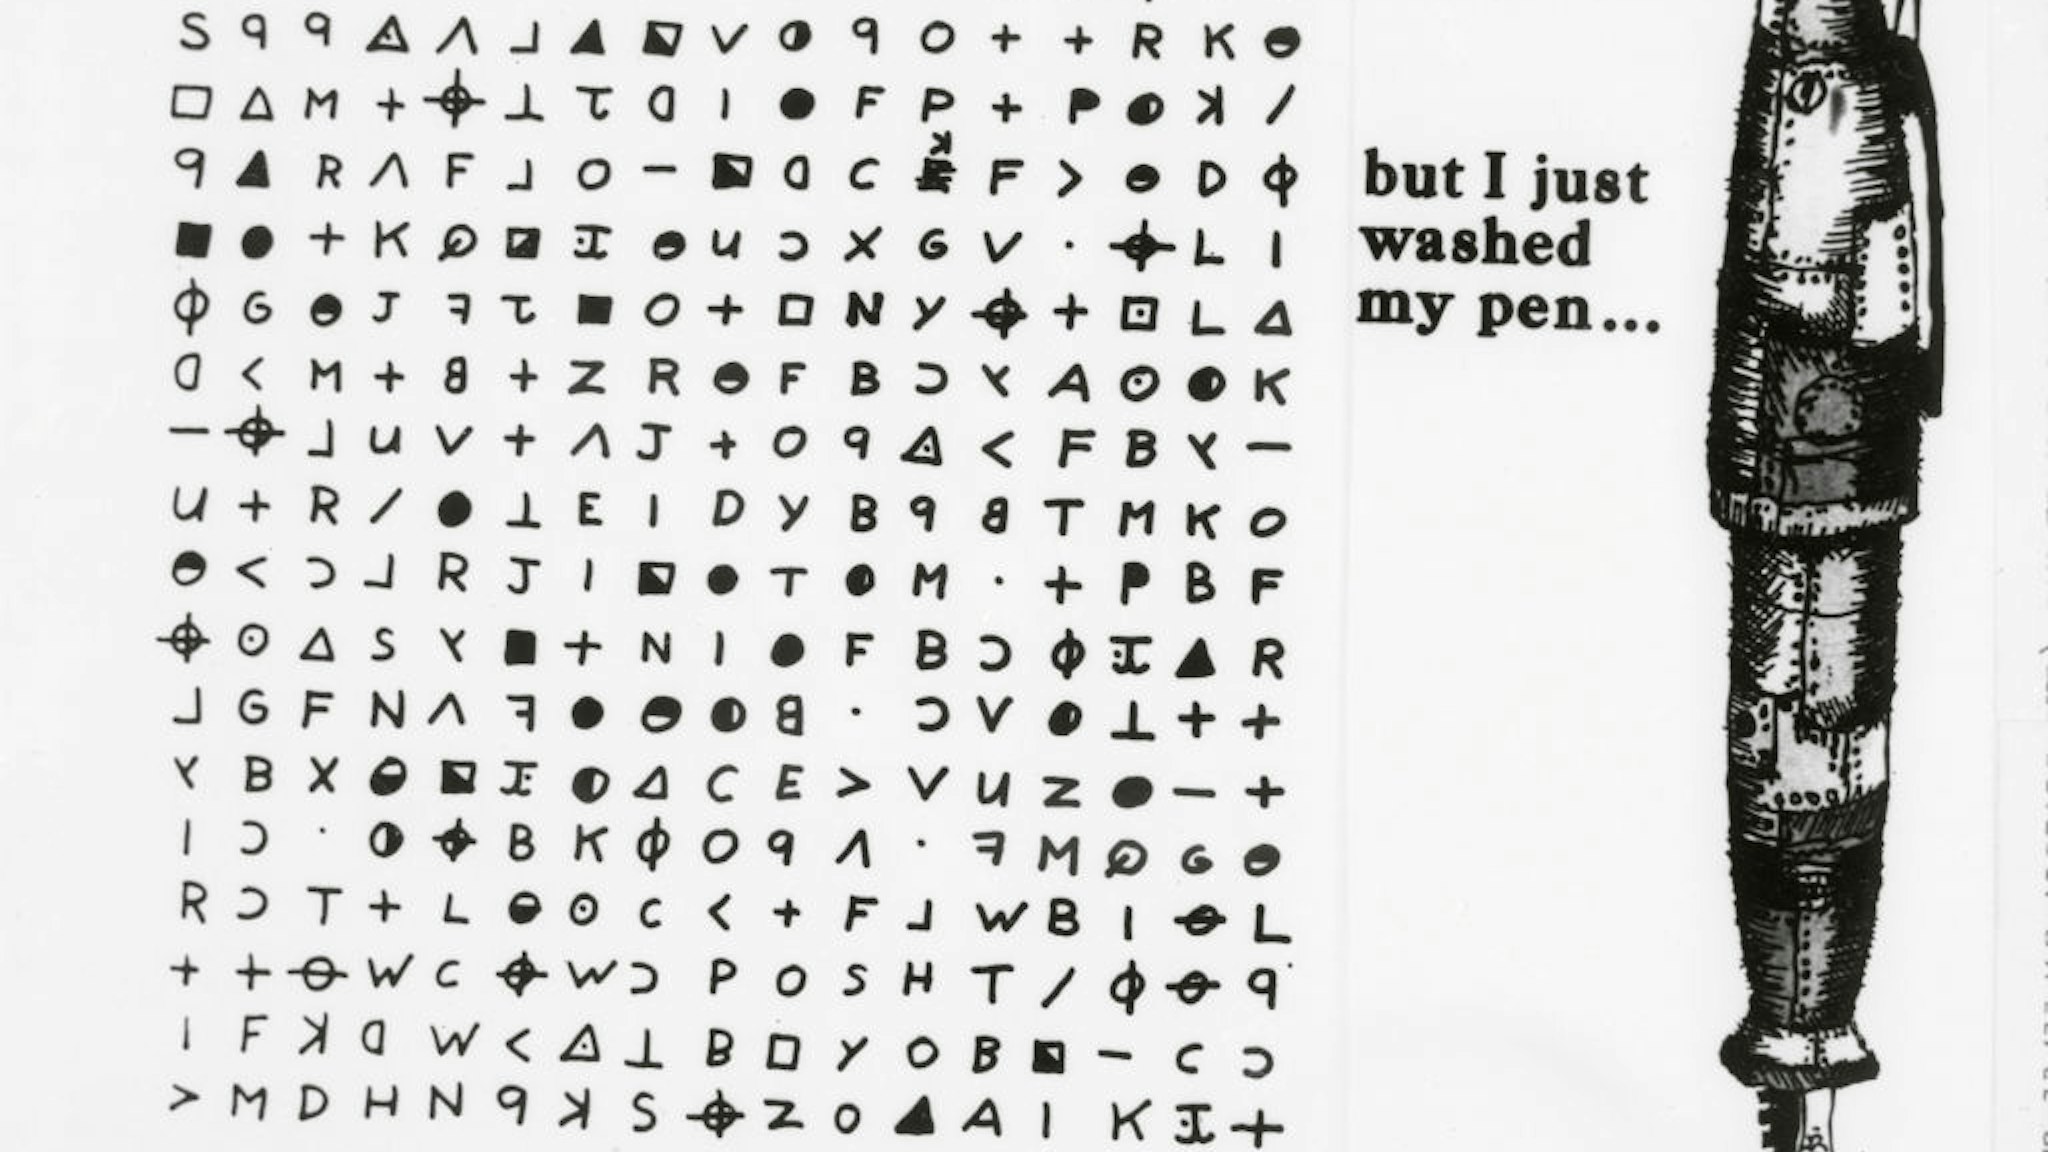 1/17/1969 - San Francisco, California: The "Zodiac" killer broke his silence Nov. 11 to boast in letters and cryptograms that he has now murdered seven persons. Two letters and a cryptogram were sent to the San Francisco Chronicle. Police believe the auth. (Photo by Bettmann/Corbis/Getty Images)